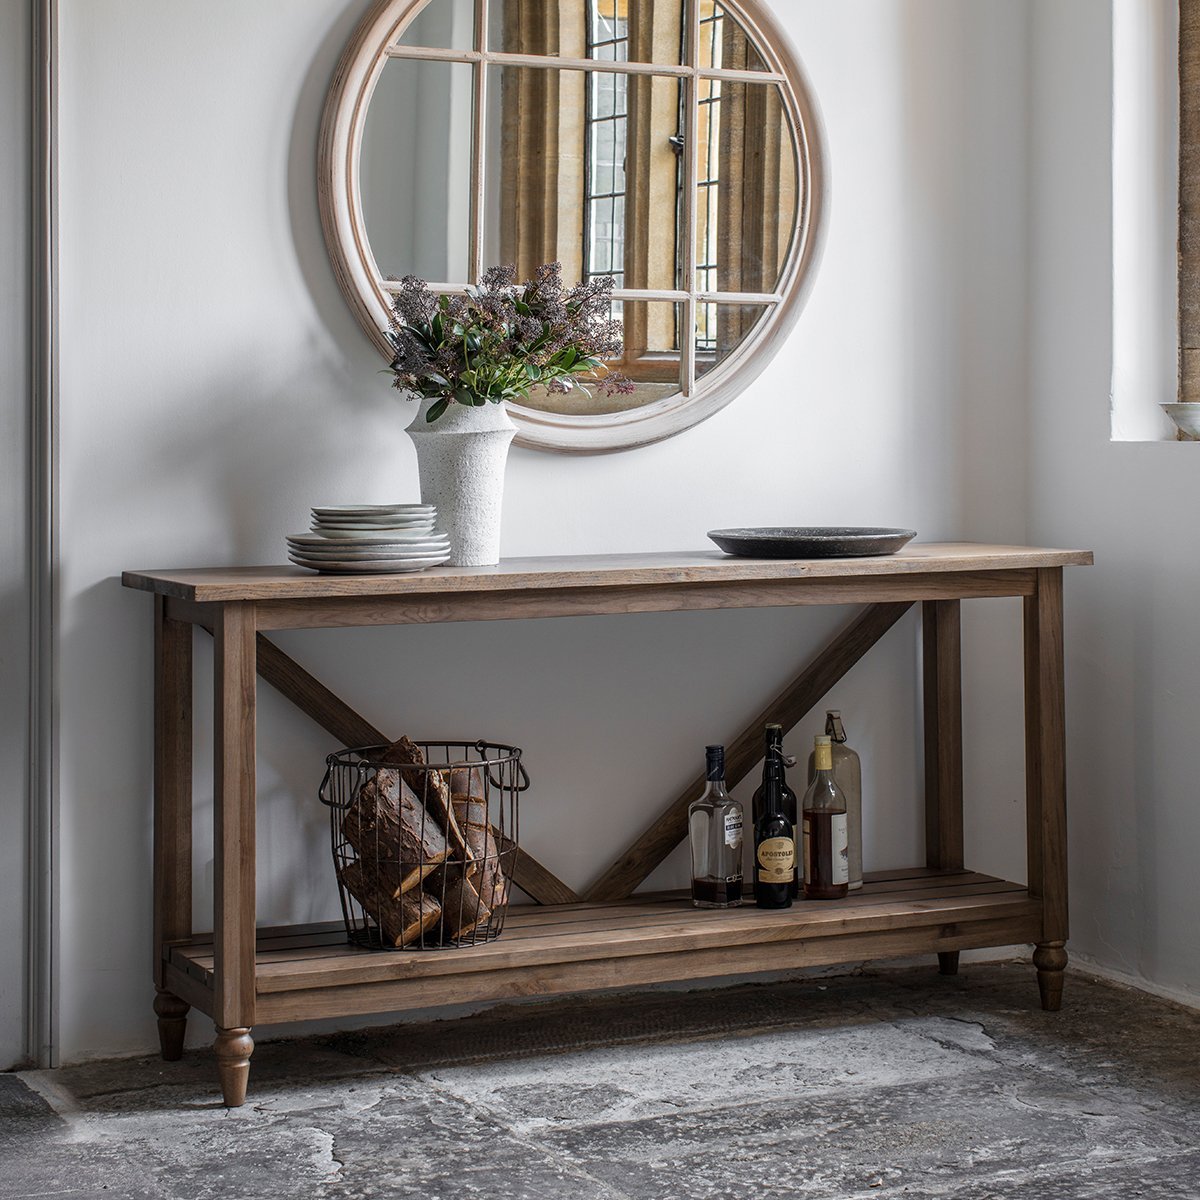 Gallery Interiors Cookham Trestle Console Table In Oak